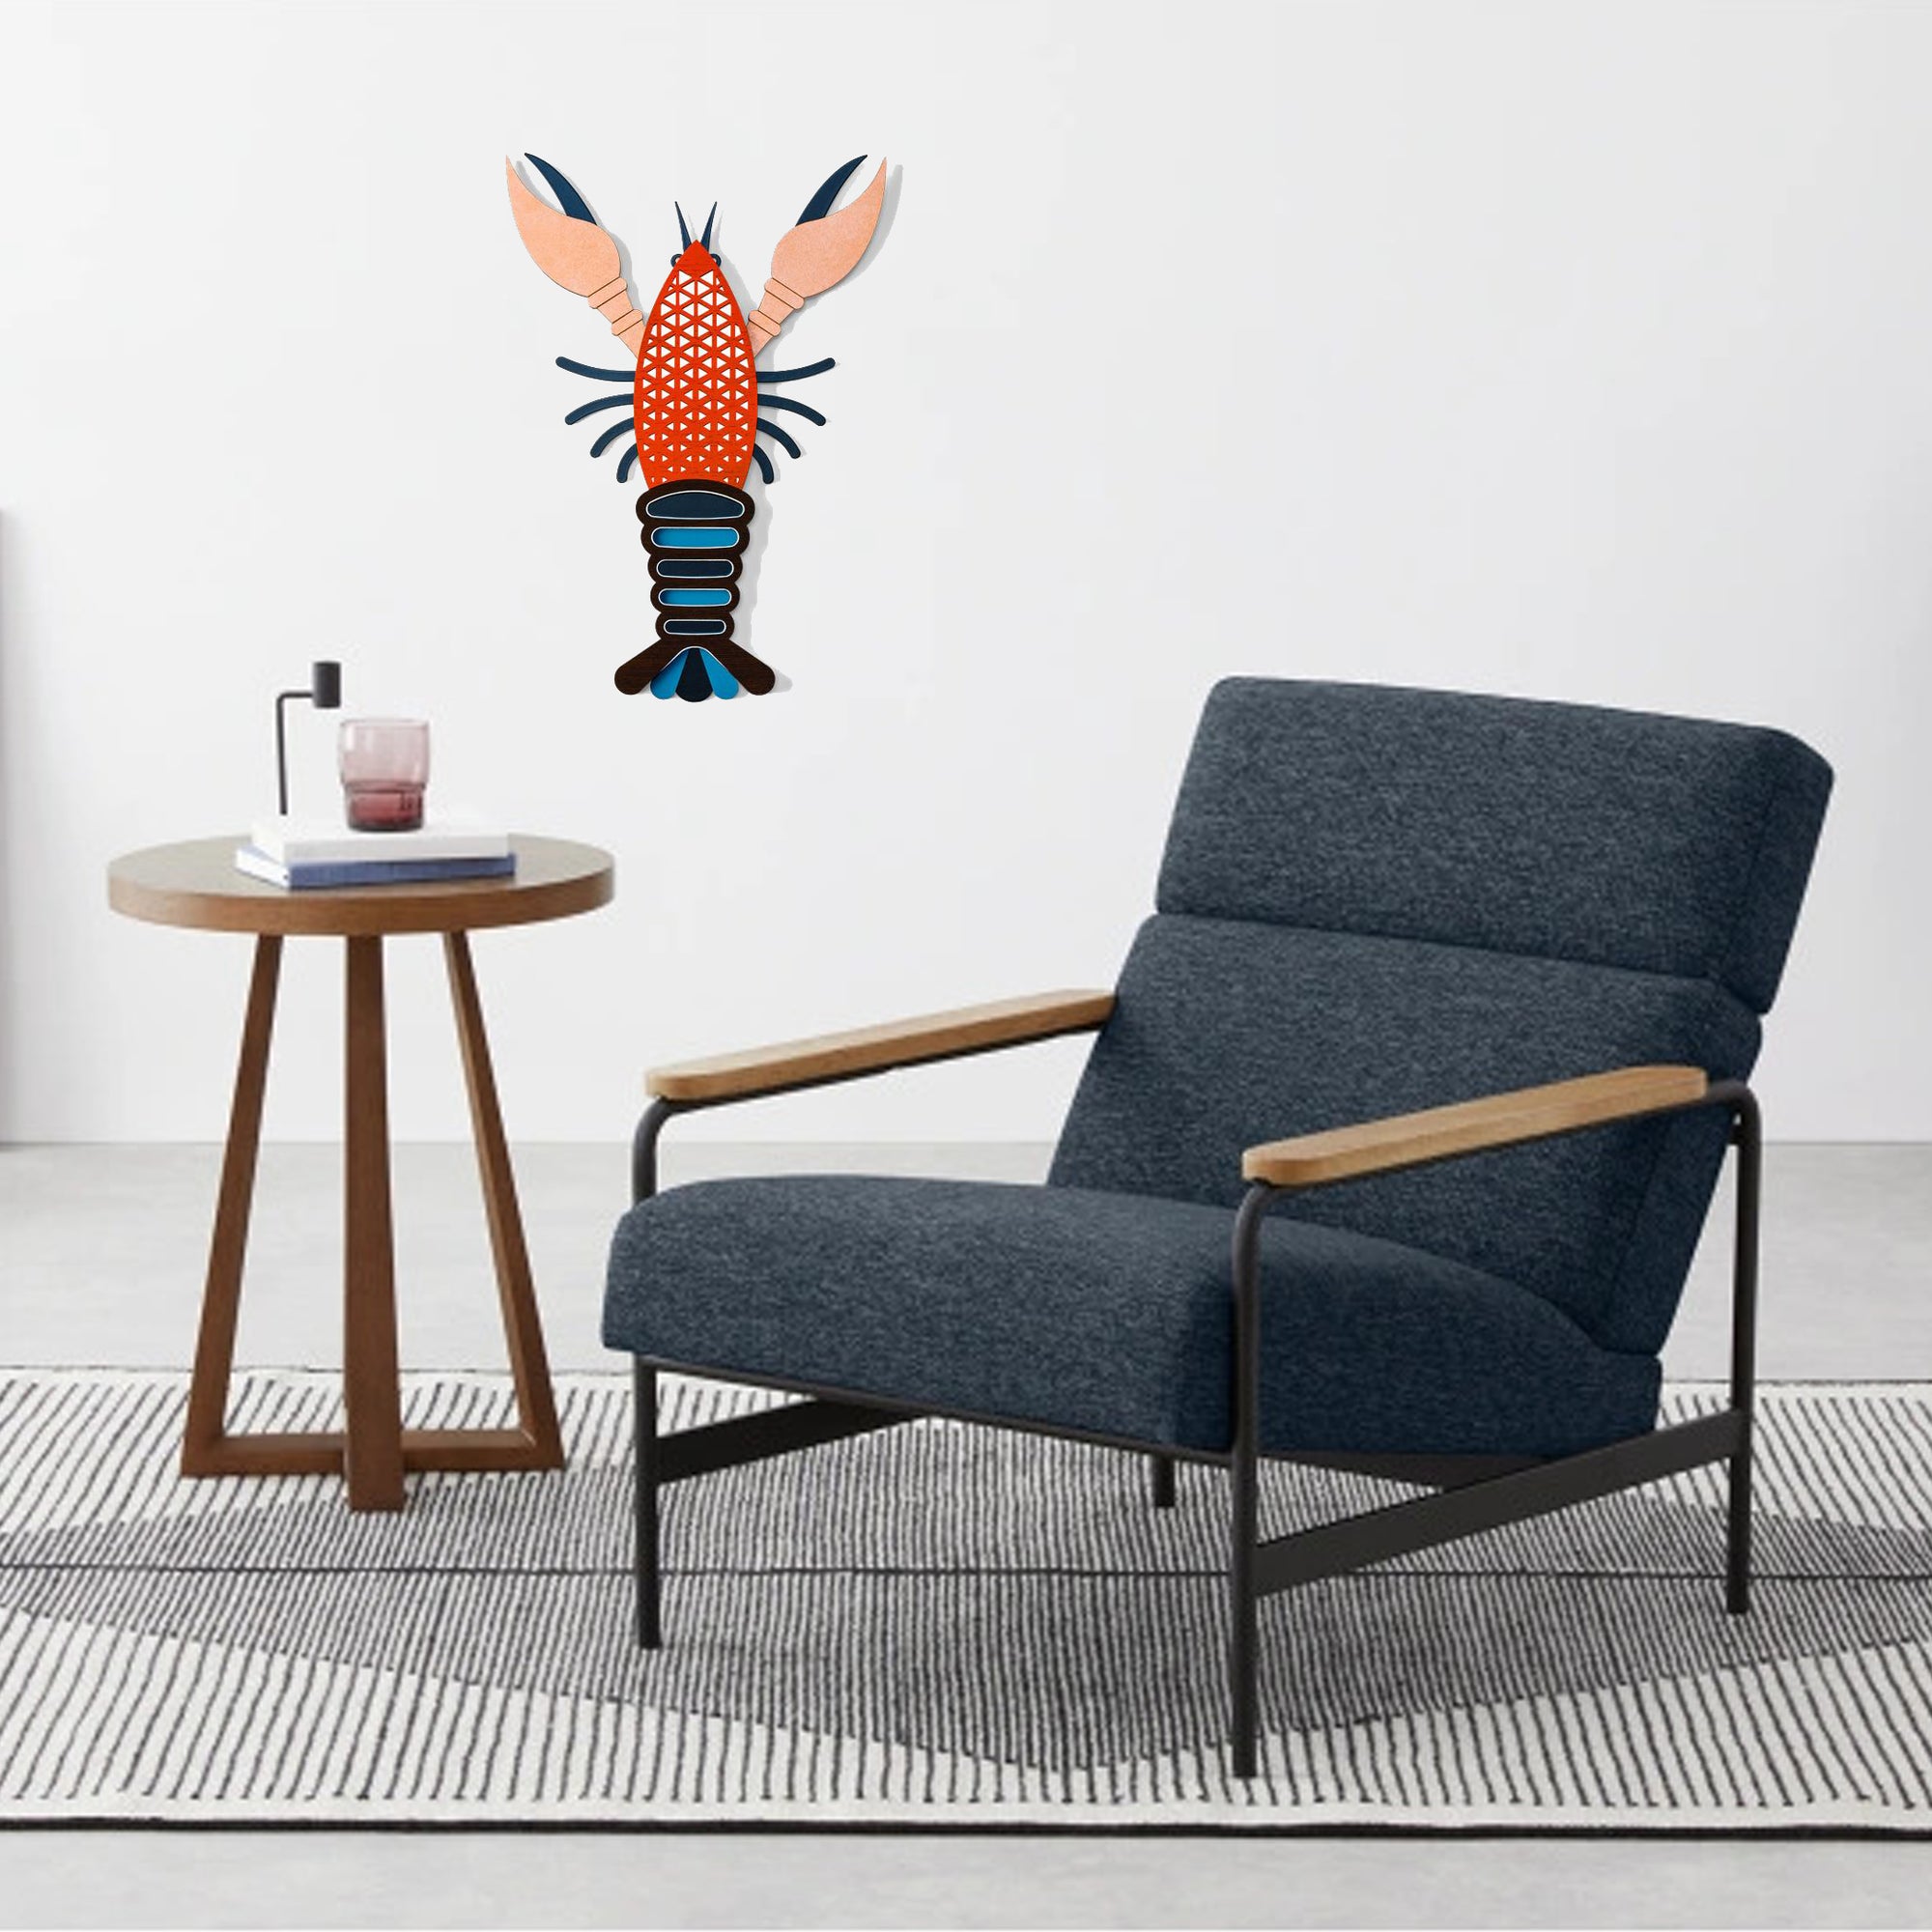 Lobster Wall Art For Ornaments